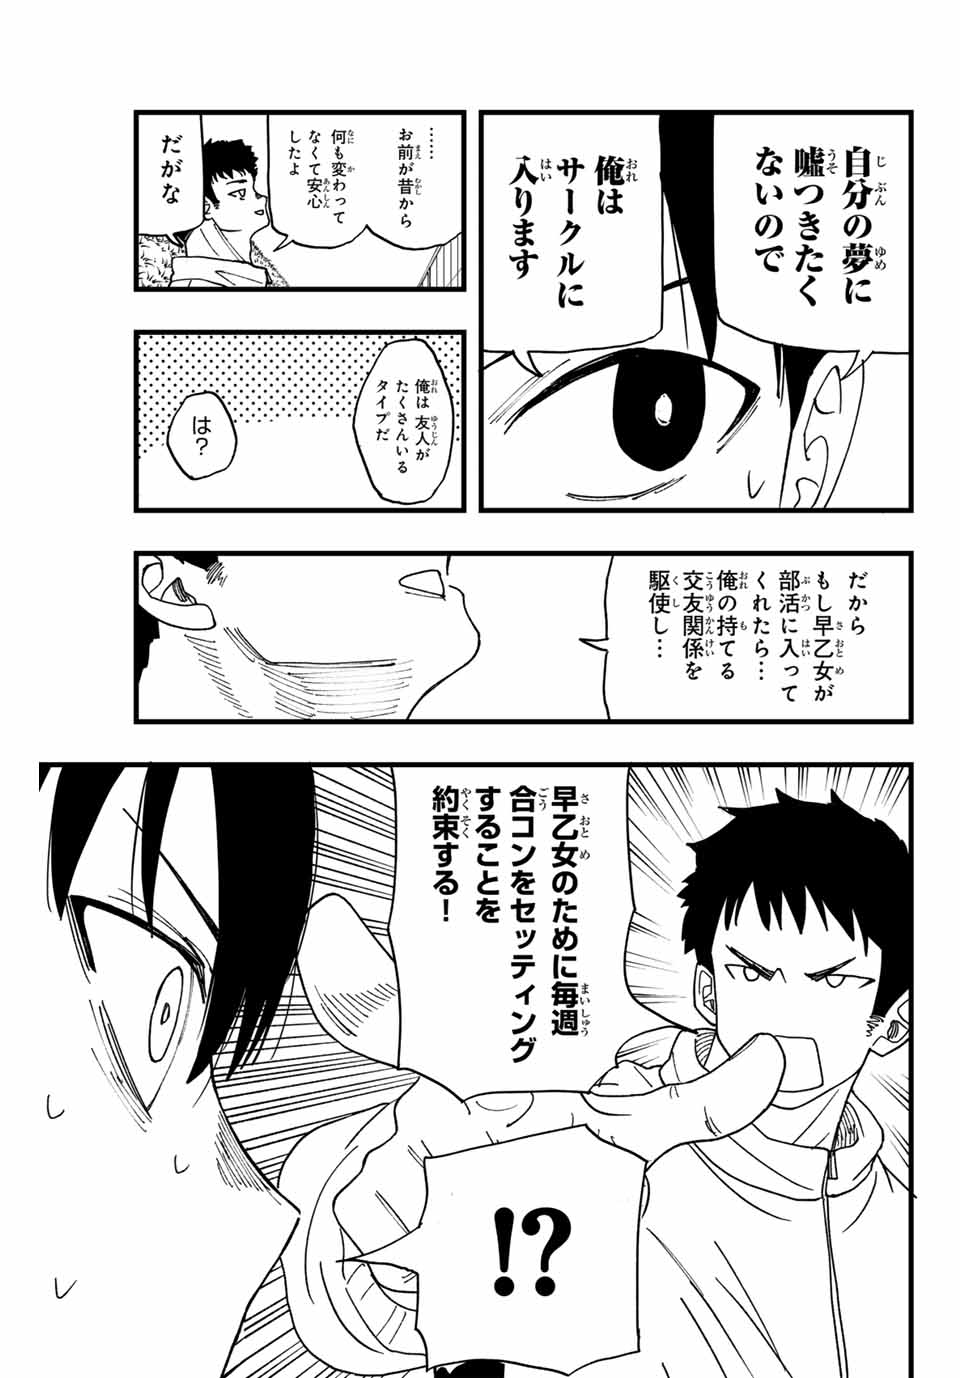 LoVE GAME 第1.1話 - Page 19